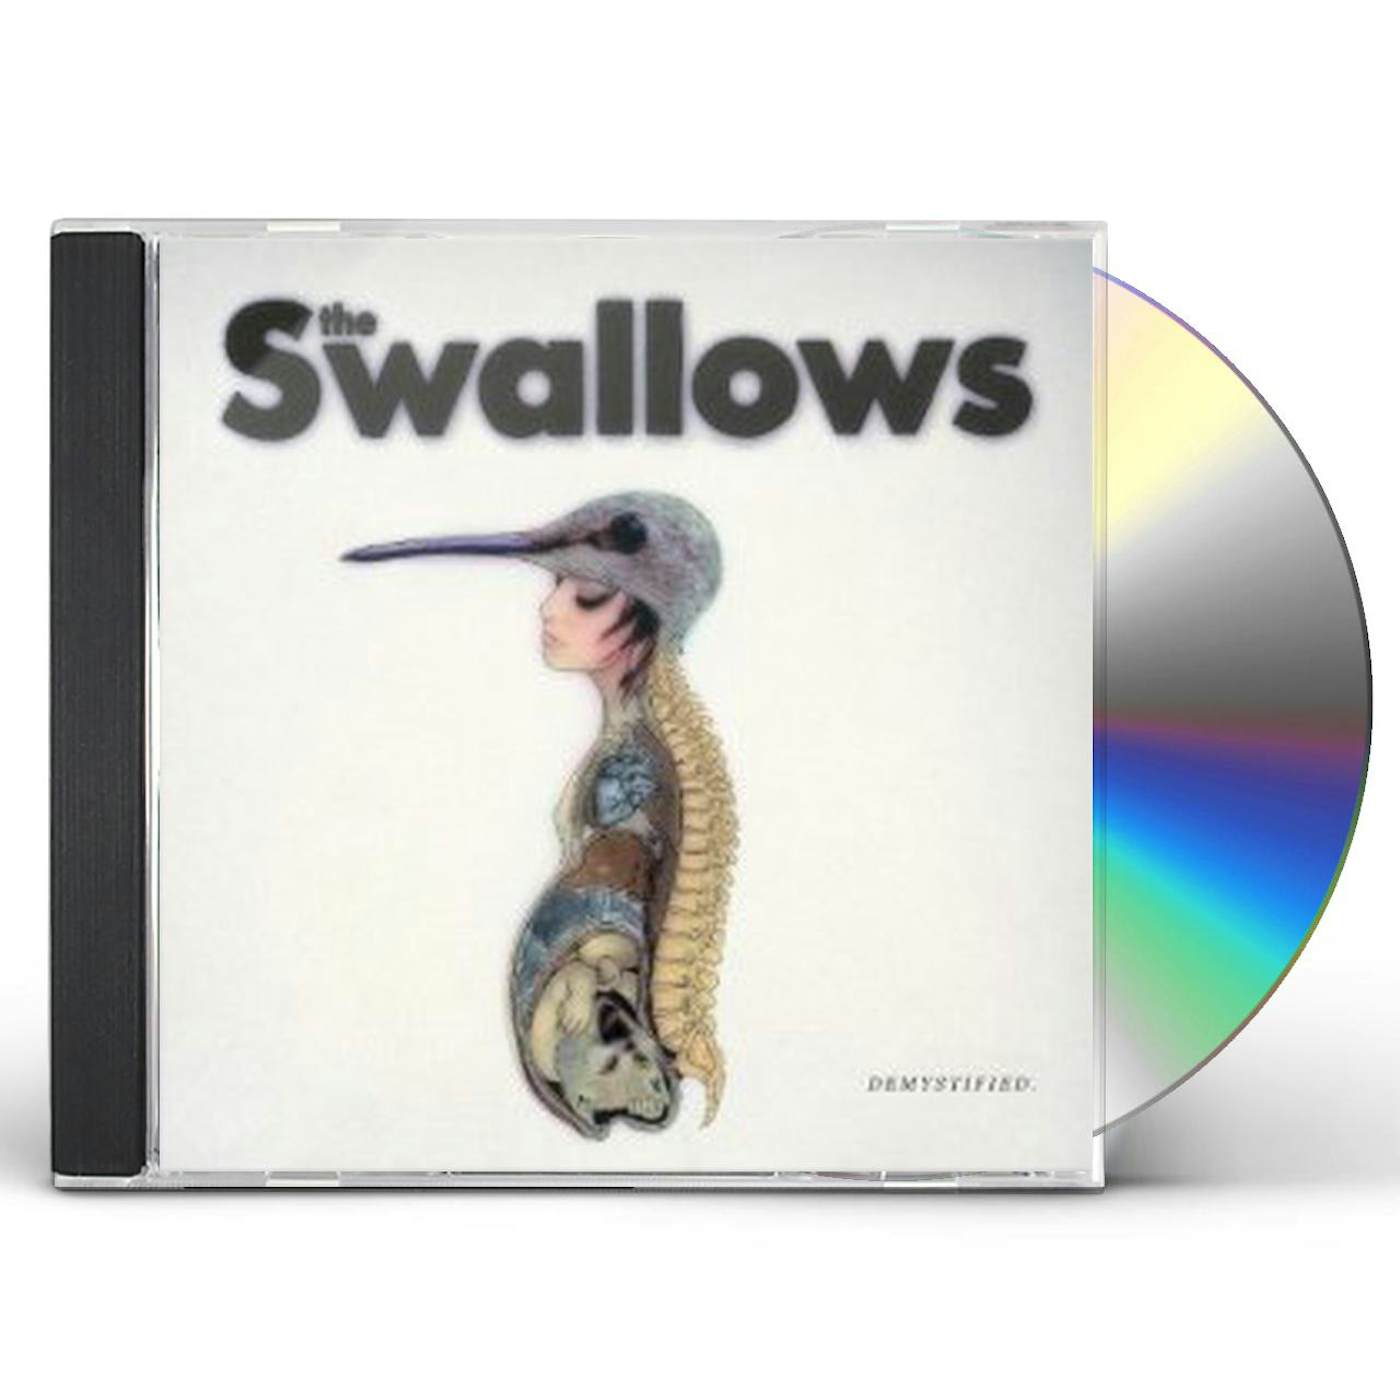 The Swallows DEMYSTIFIED CD